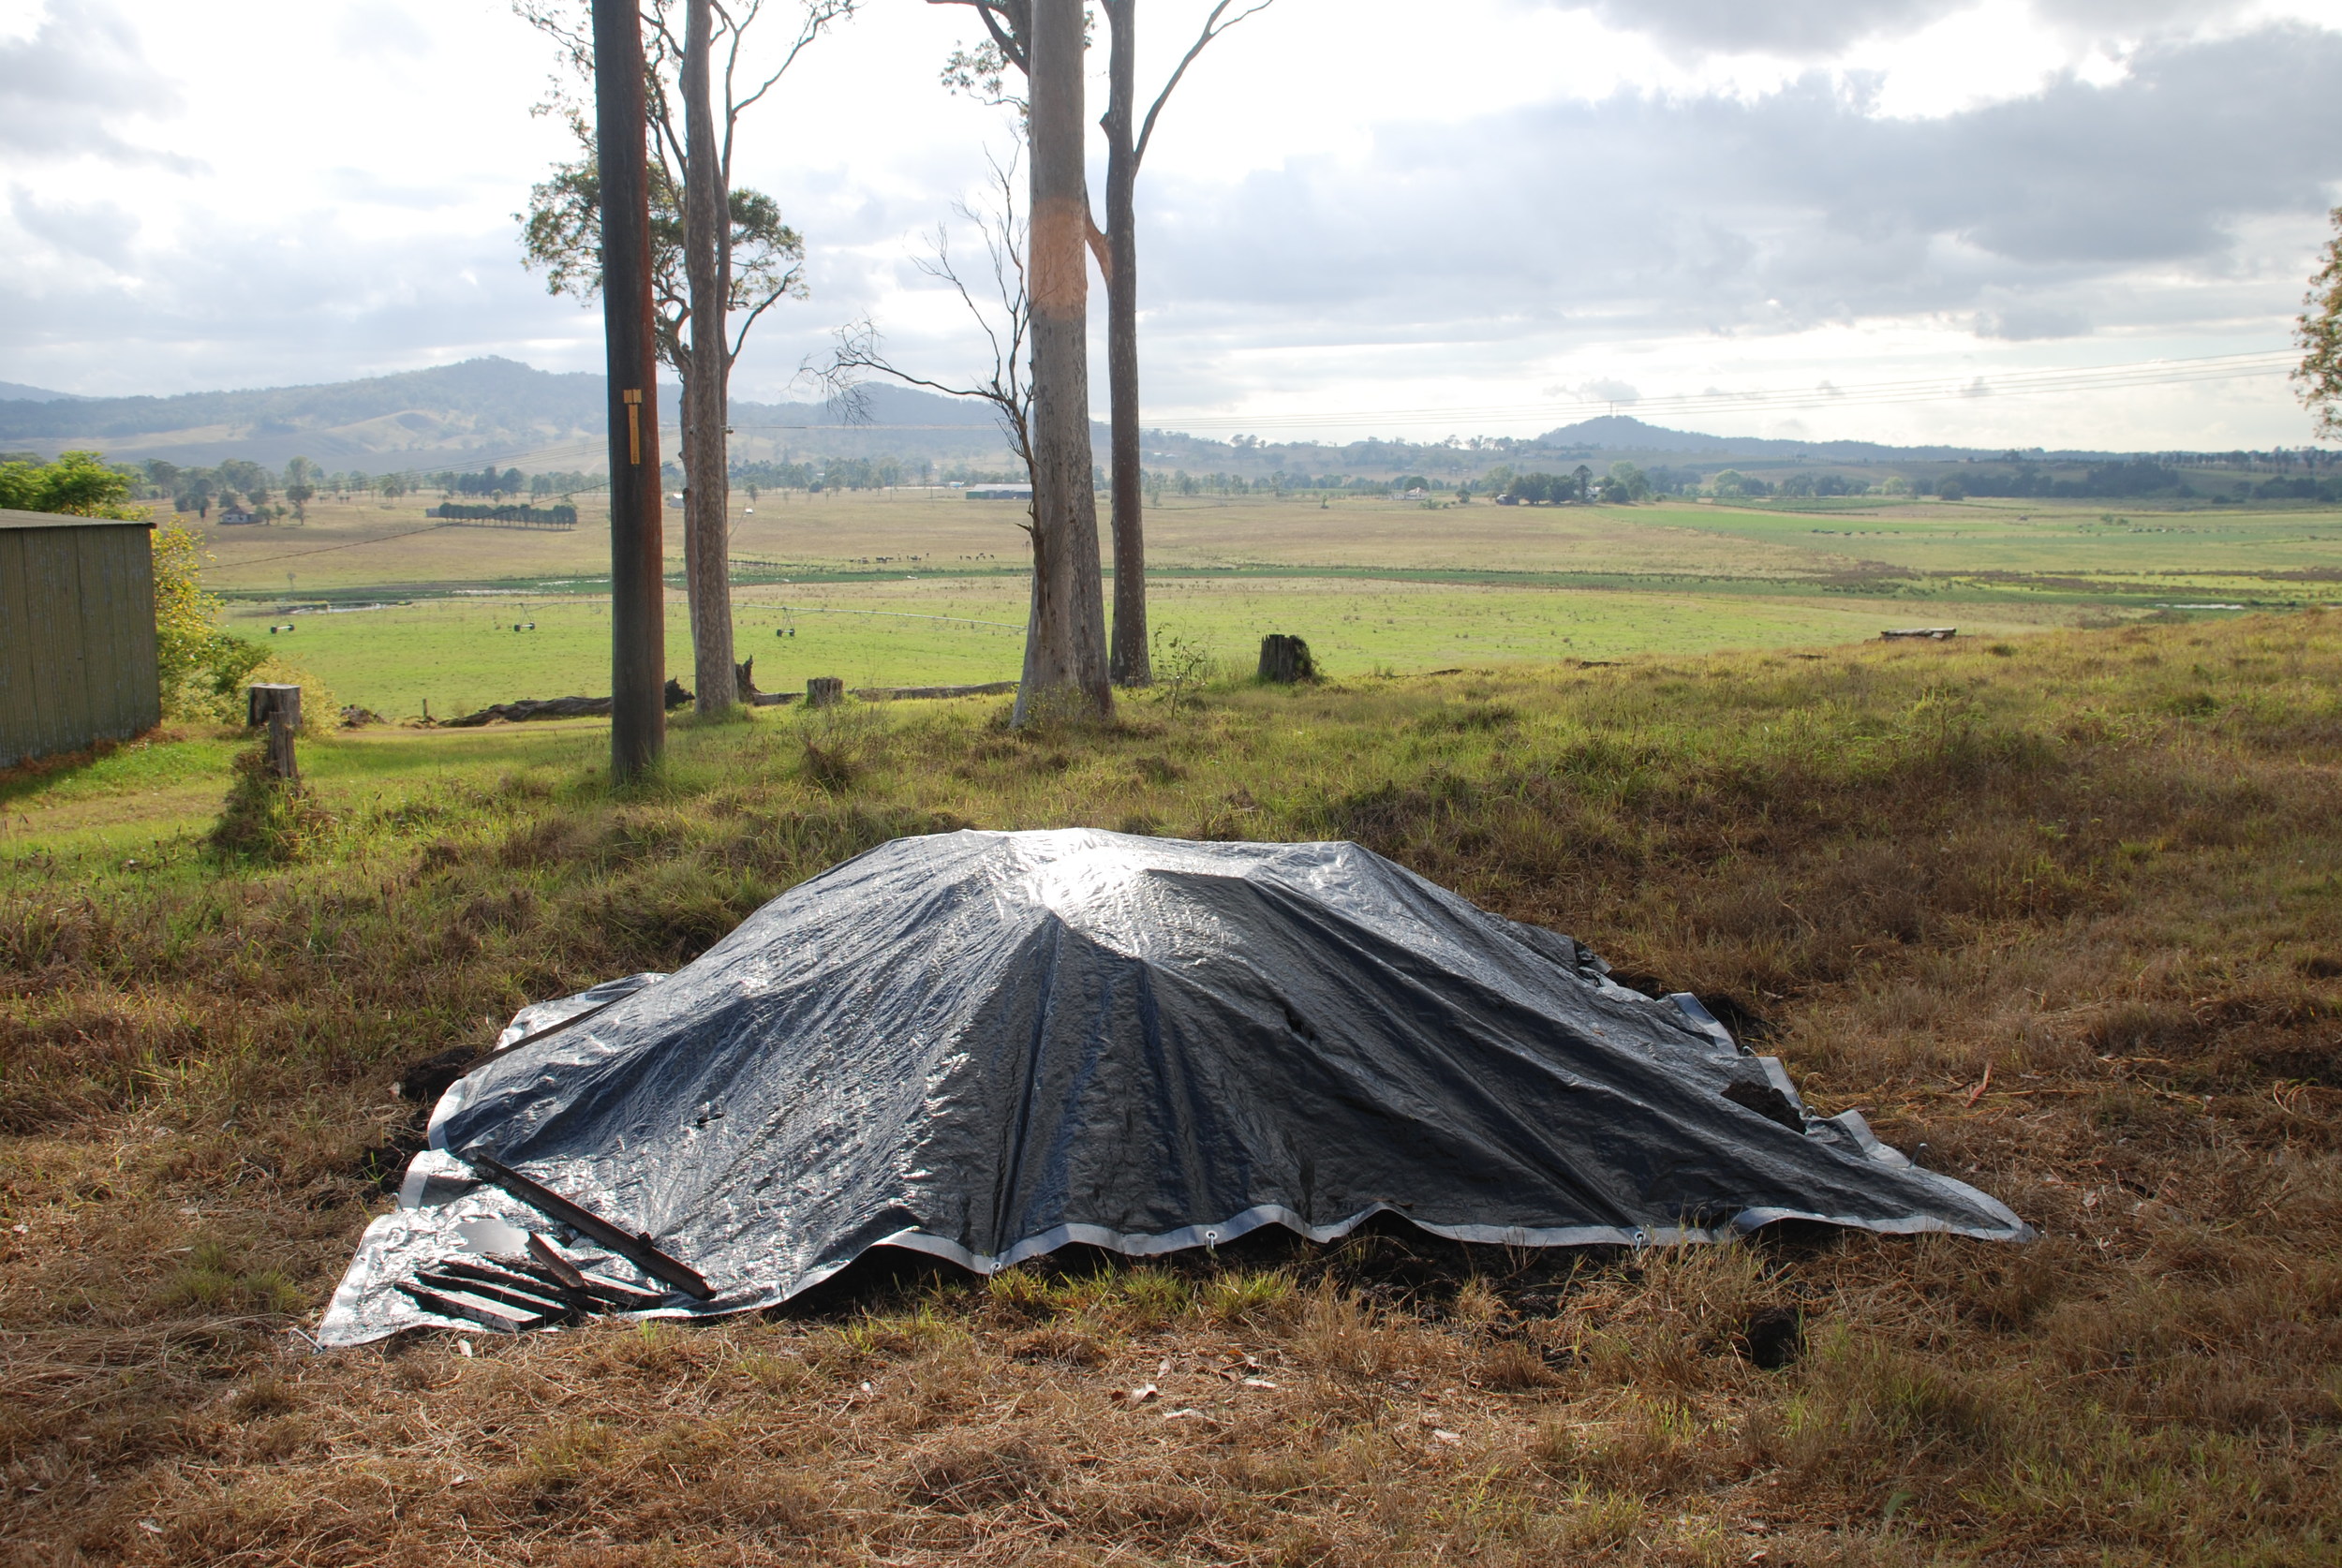  Whale remains buried in a field in the Hunter Valley, NSW.&nbsp;©&nbsp;Sandy Ingleby (used with permission) 